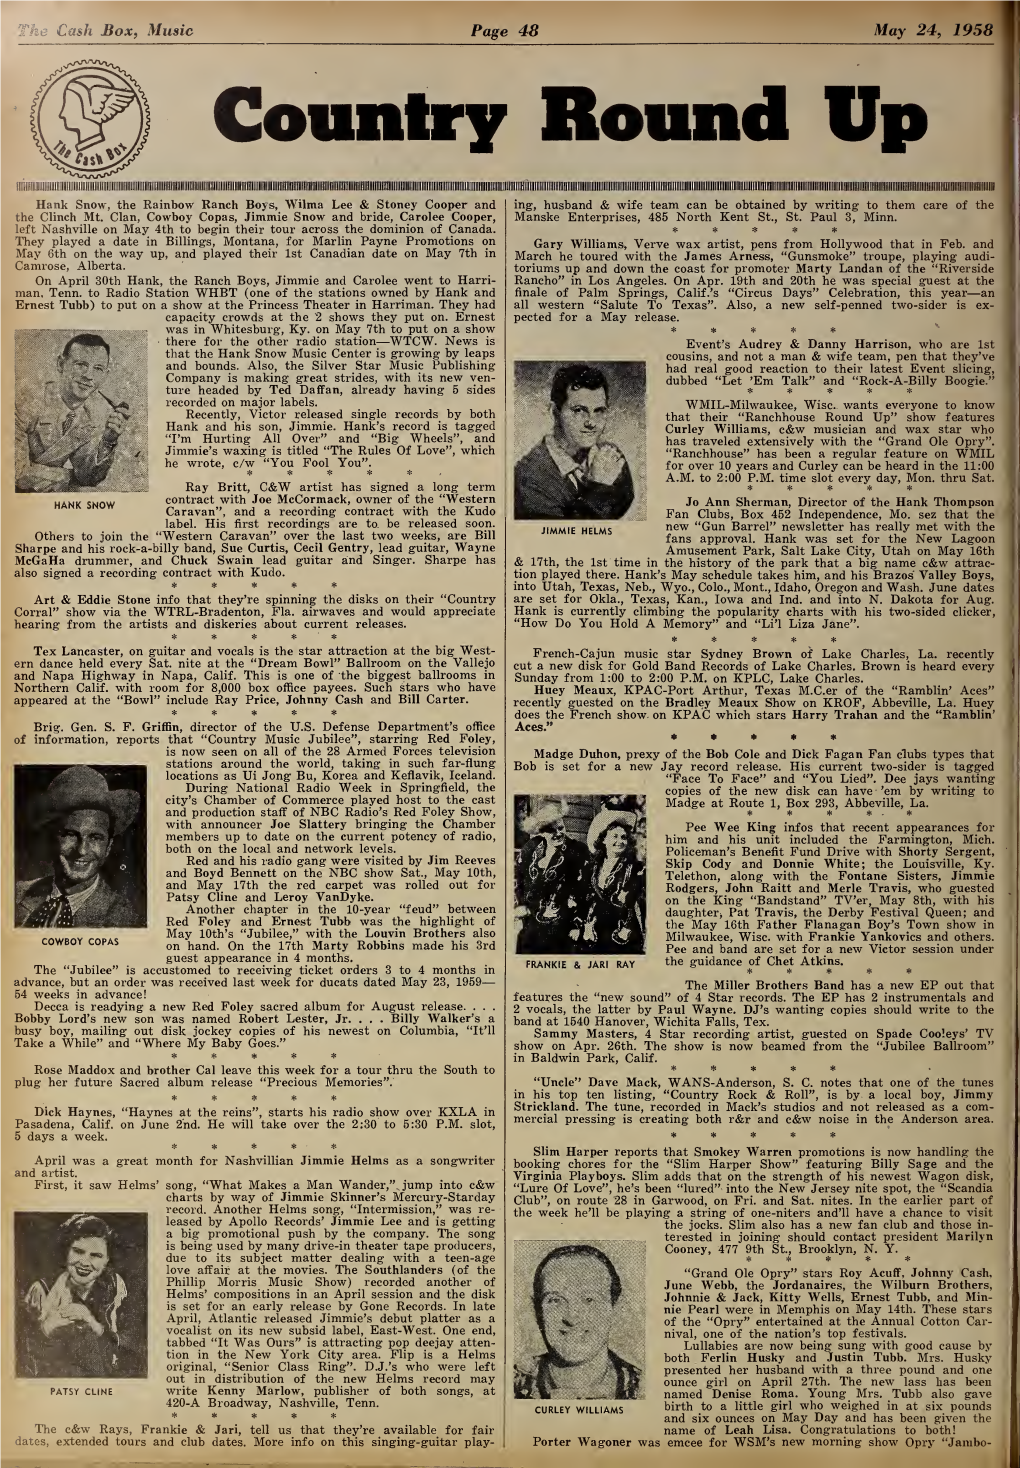 Cash Box, Music Page 48 May 24, 1958 Country Round Up